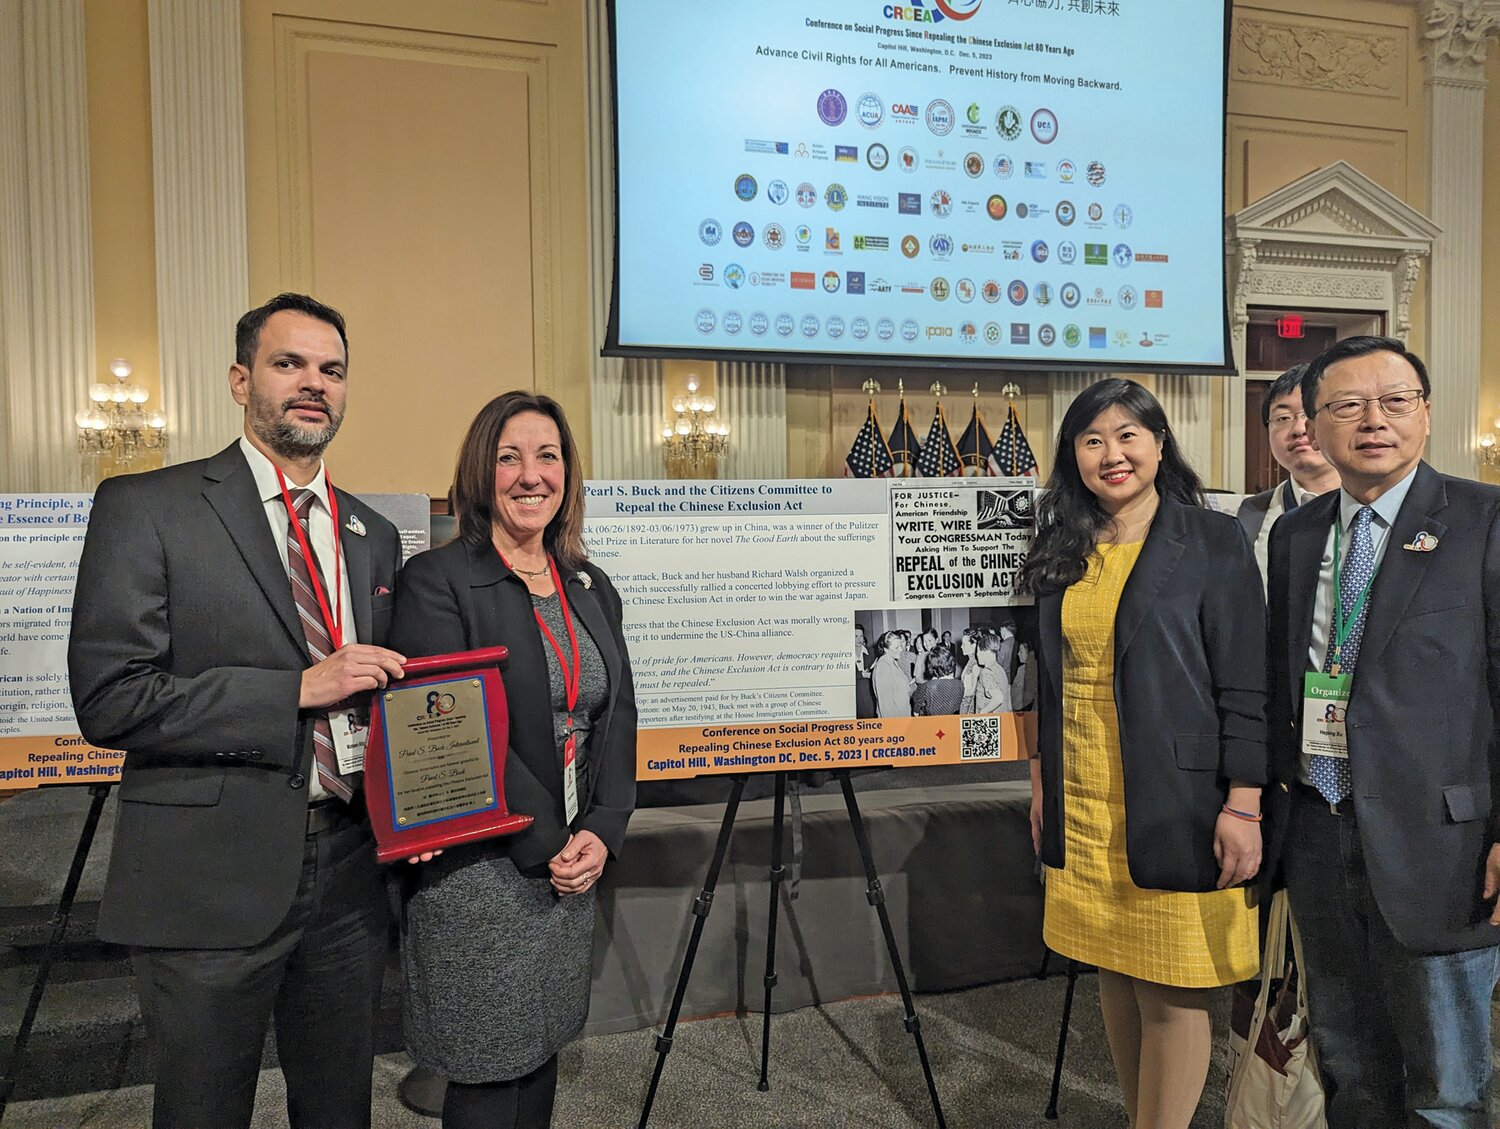 From left are: Pearl S. Buck International Board Chair Mateen Afzal, PSBI President and CEO Christy Holland, PSBI Board member Stephanie Sun, and CRCEA80 organizer Heping Xu.